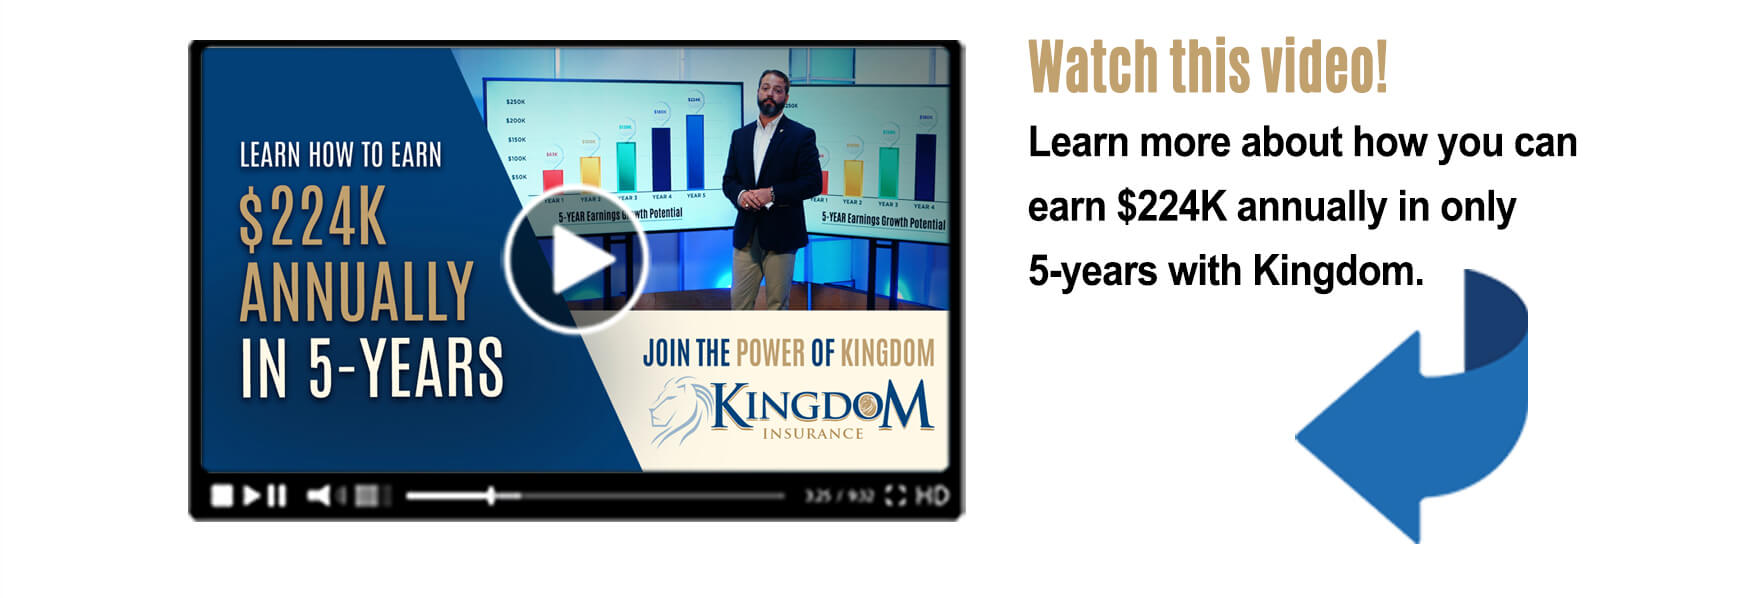 Watch this video! Learn more about how you can earn $224K annually in only 5 years with Kingdom.